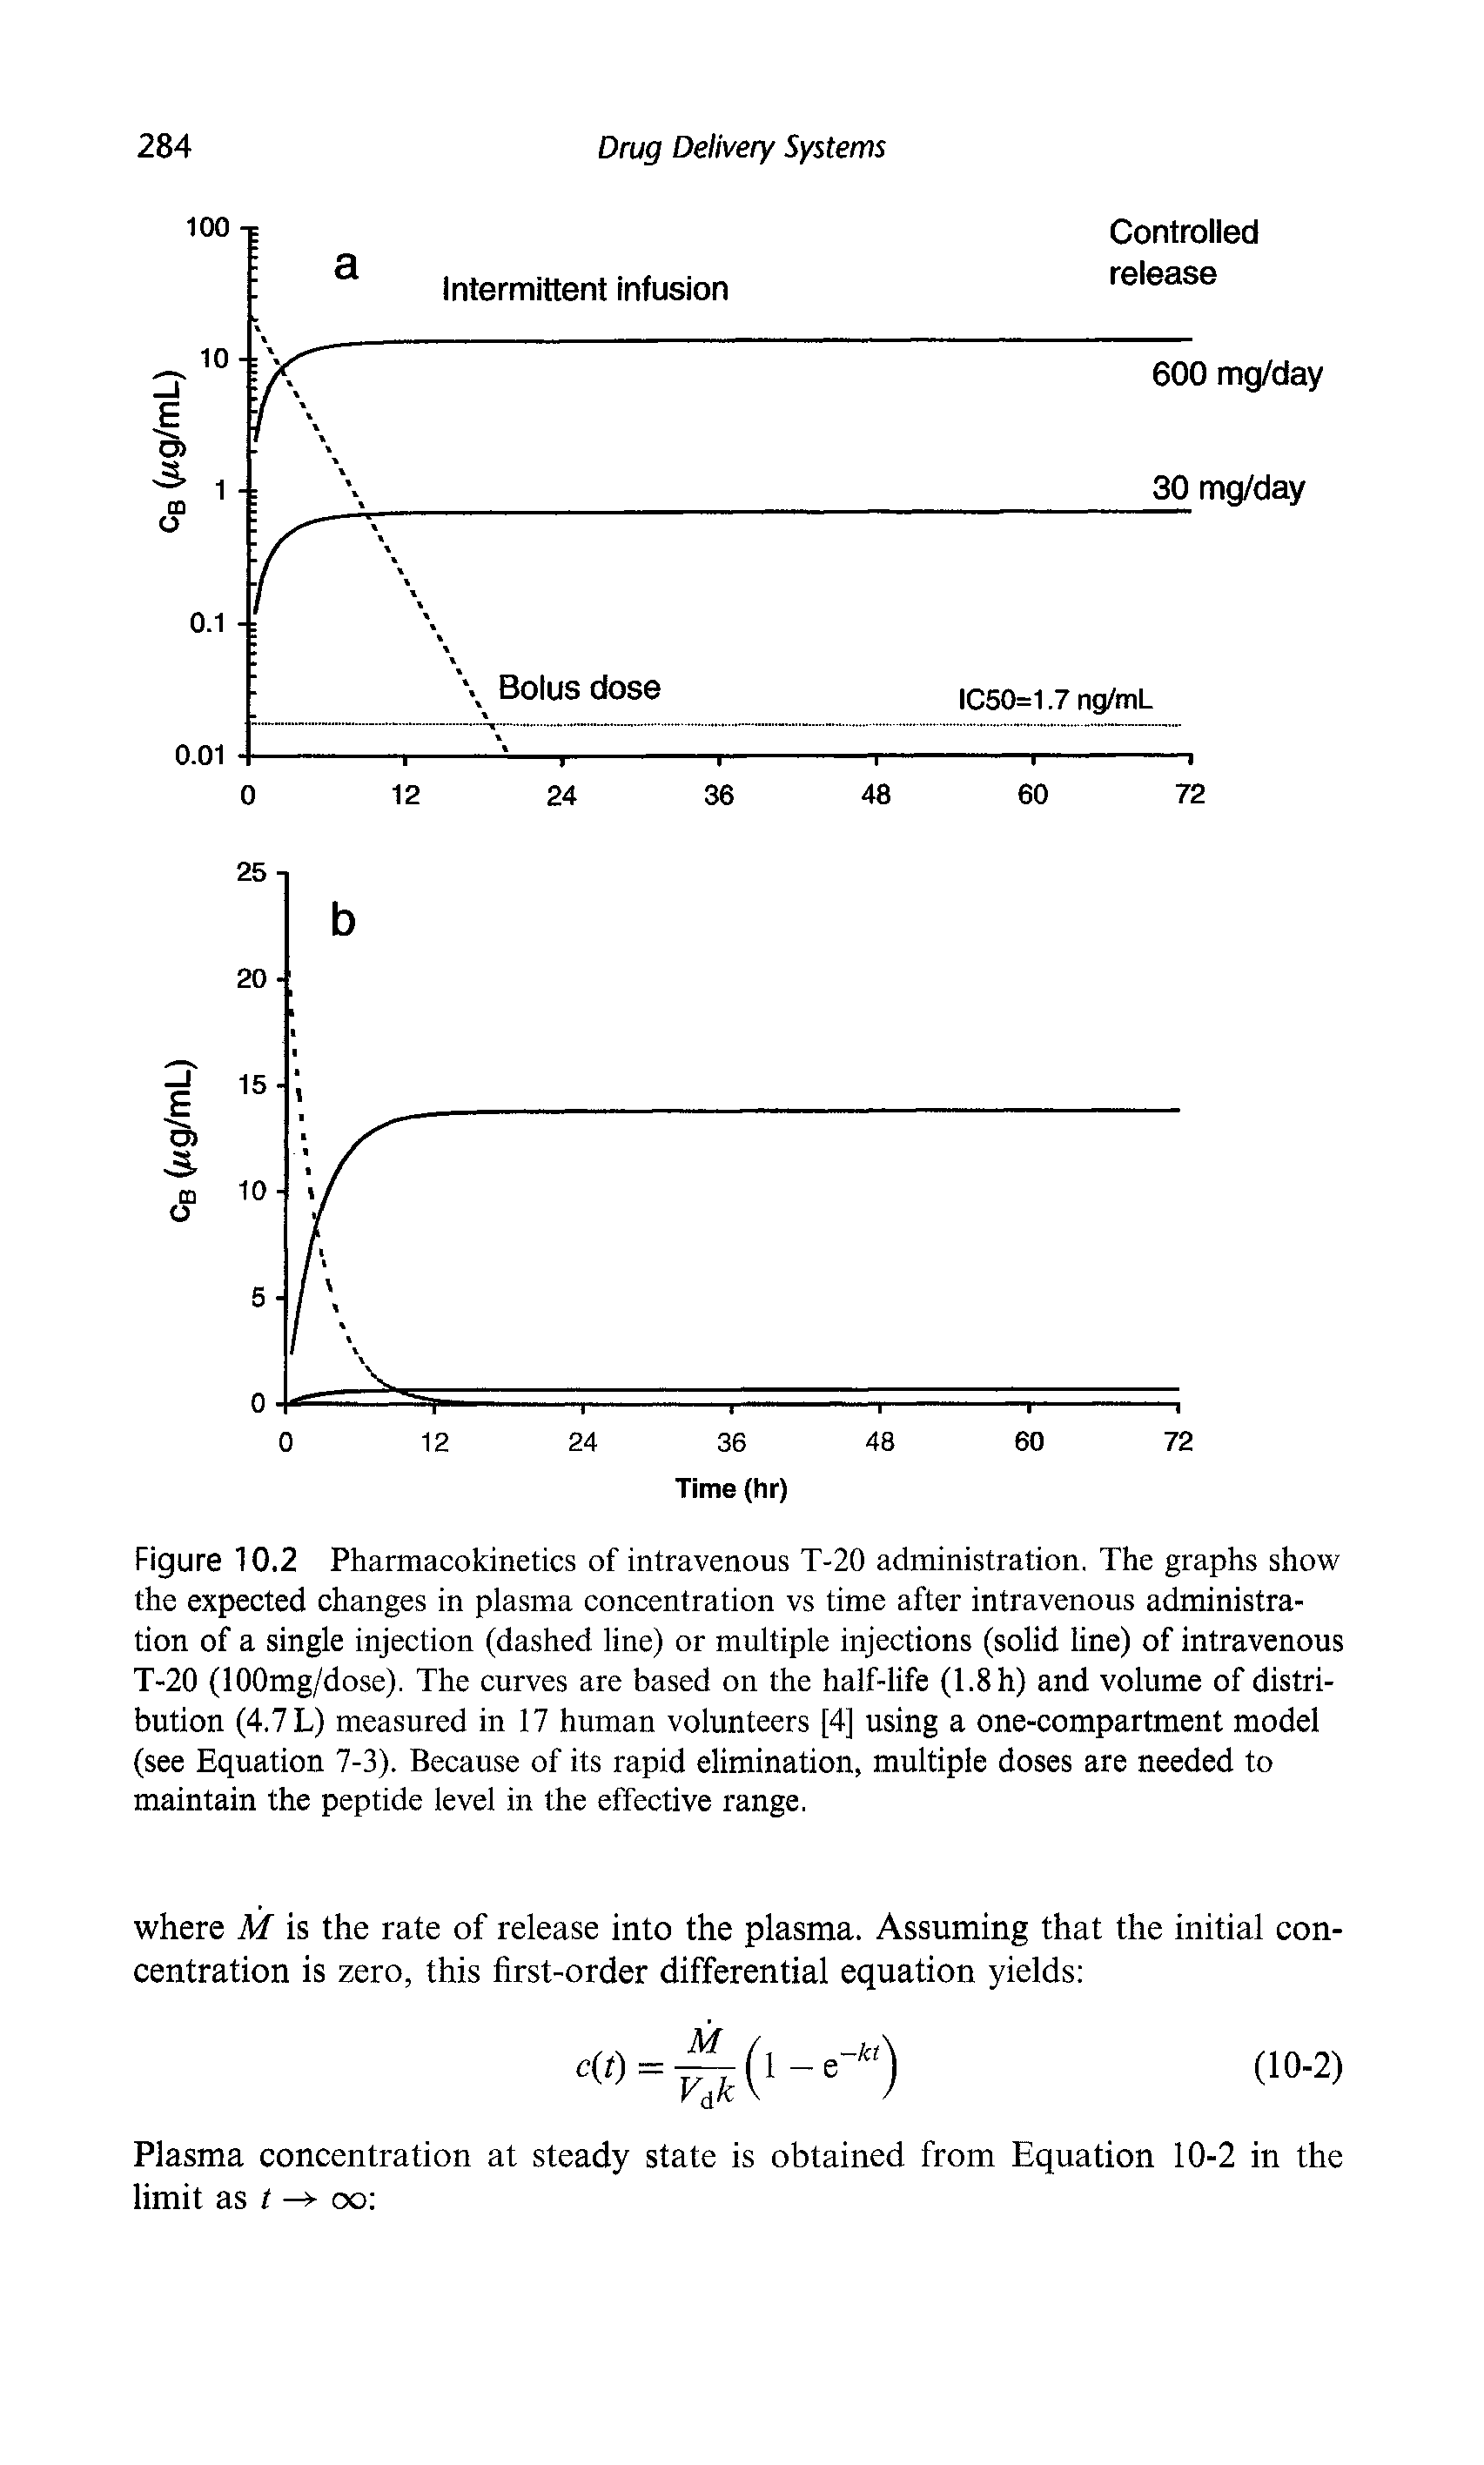 Figure 10.2 Pharmacokinetics of intravenous T-20 administration. The graphs show the expected changes in plasma concentration vs time after intravenous administration of a single injection (dashed line) or multiple injections (solid line) of intravenous T-20 (lOOmg/dose). The curves are based on the half-life (1.8 h) and volume of distribution (4.7 L) measured in 17 human volunteers [4] using a one-compartment model (see Equation 7-3). Because of its rapid elimination, multiple doses are needed to maintain the peptide level in the effective range.